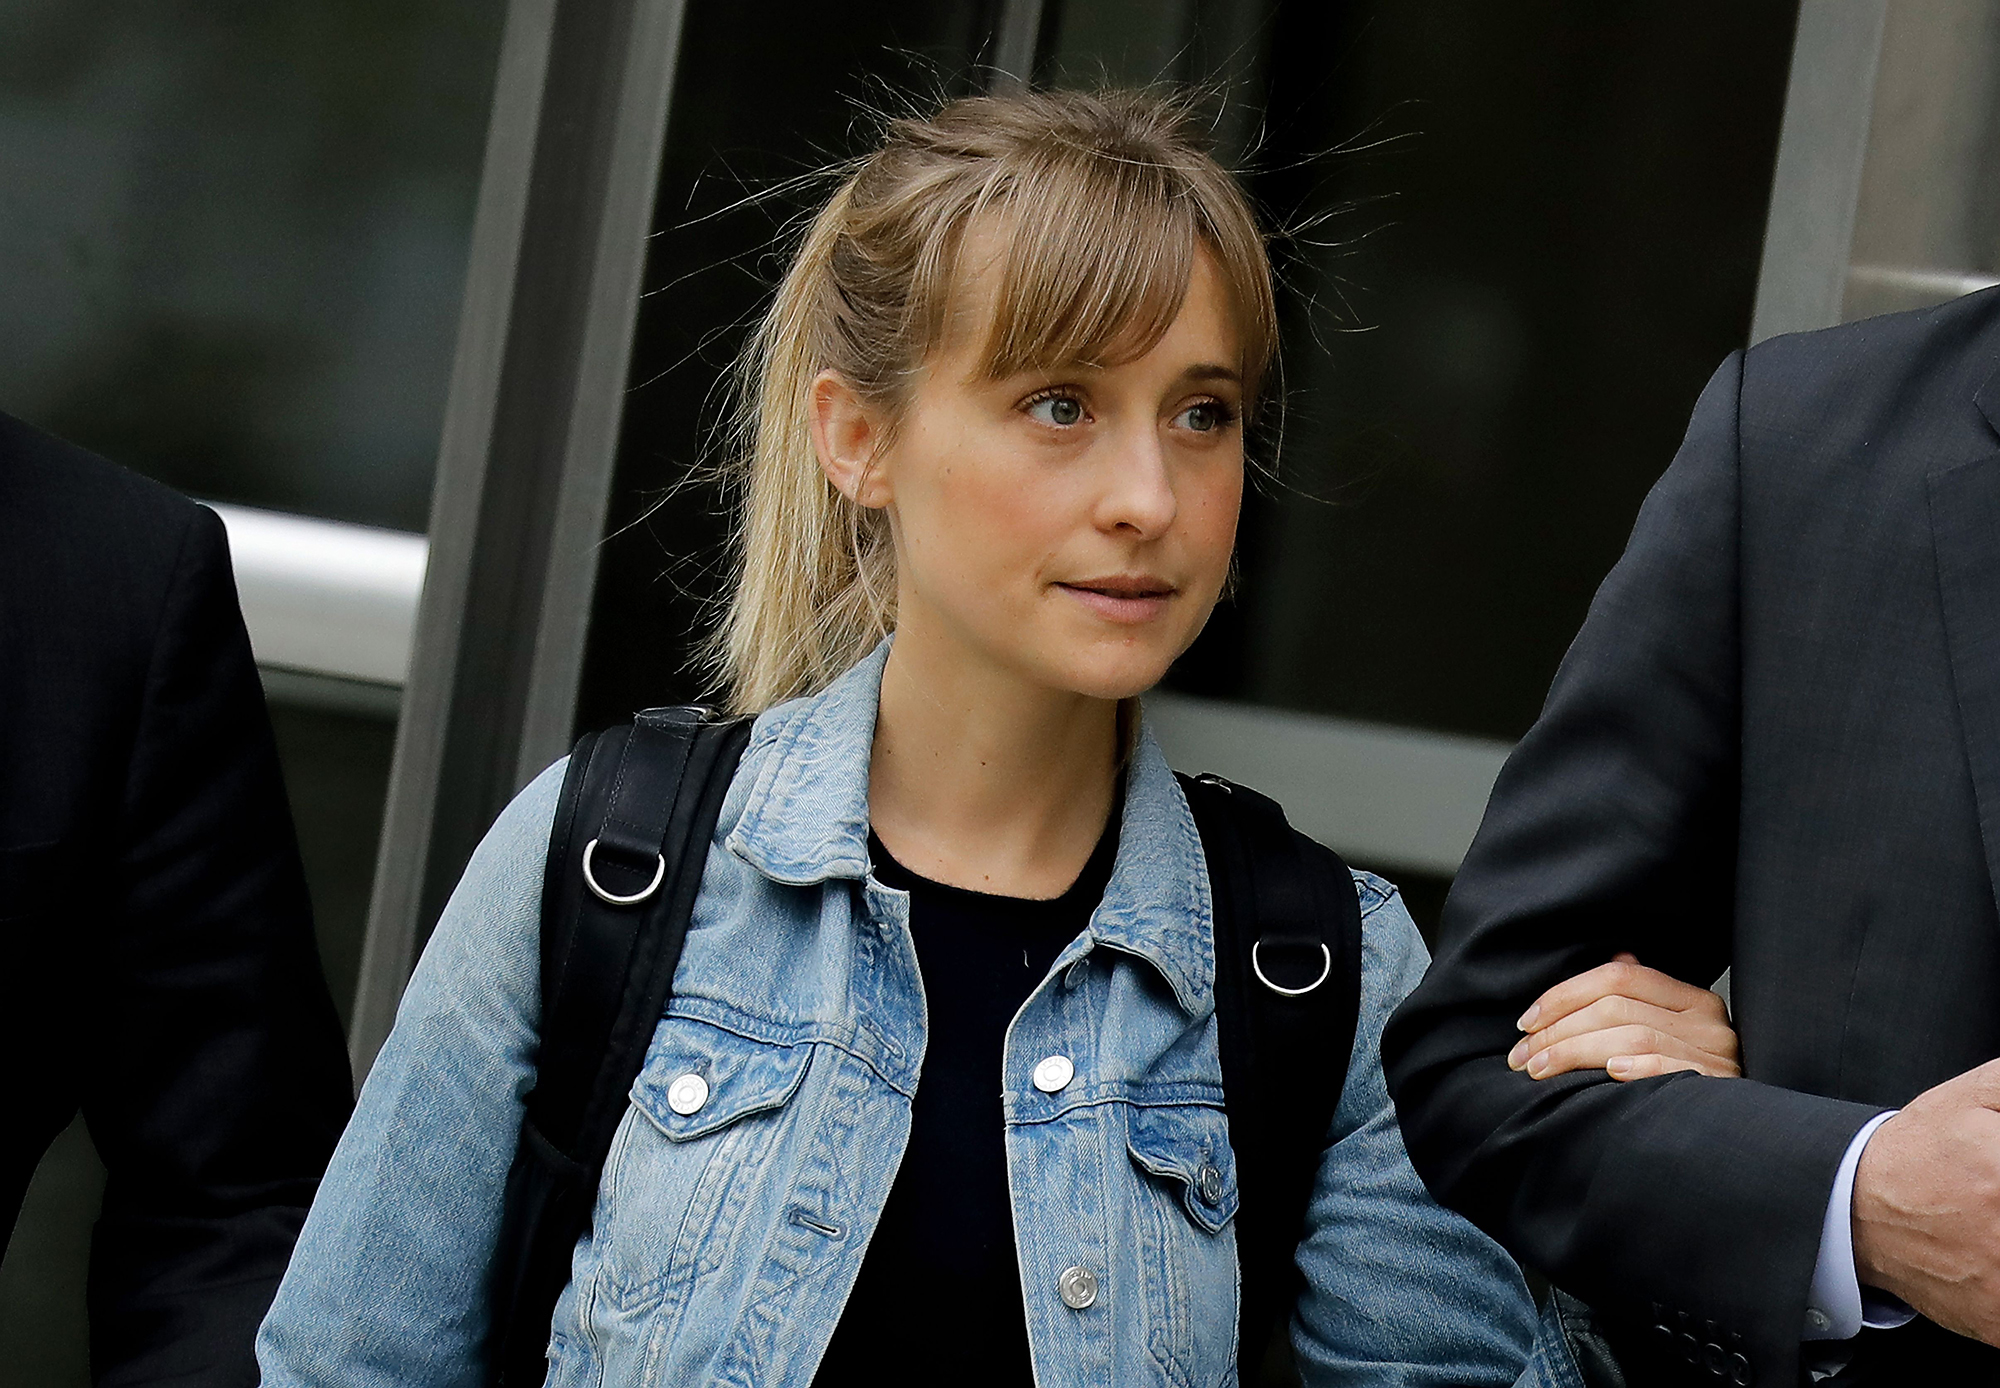 Allison Mack Apologizes To Nxivm Survivors As She Asks For No Jail Time